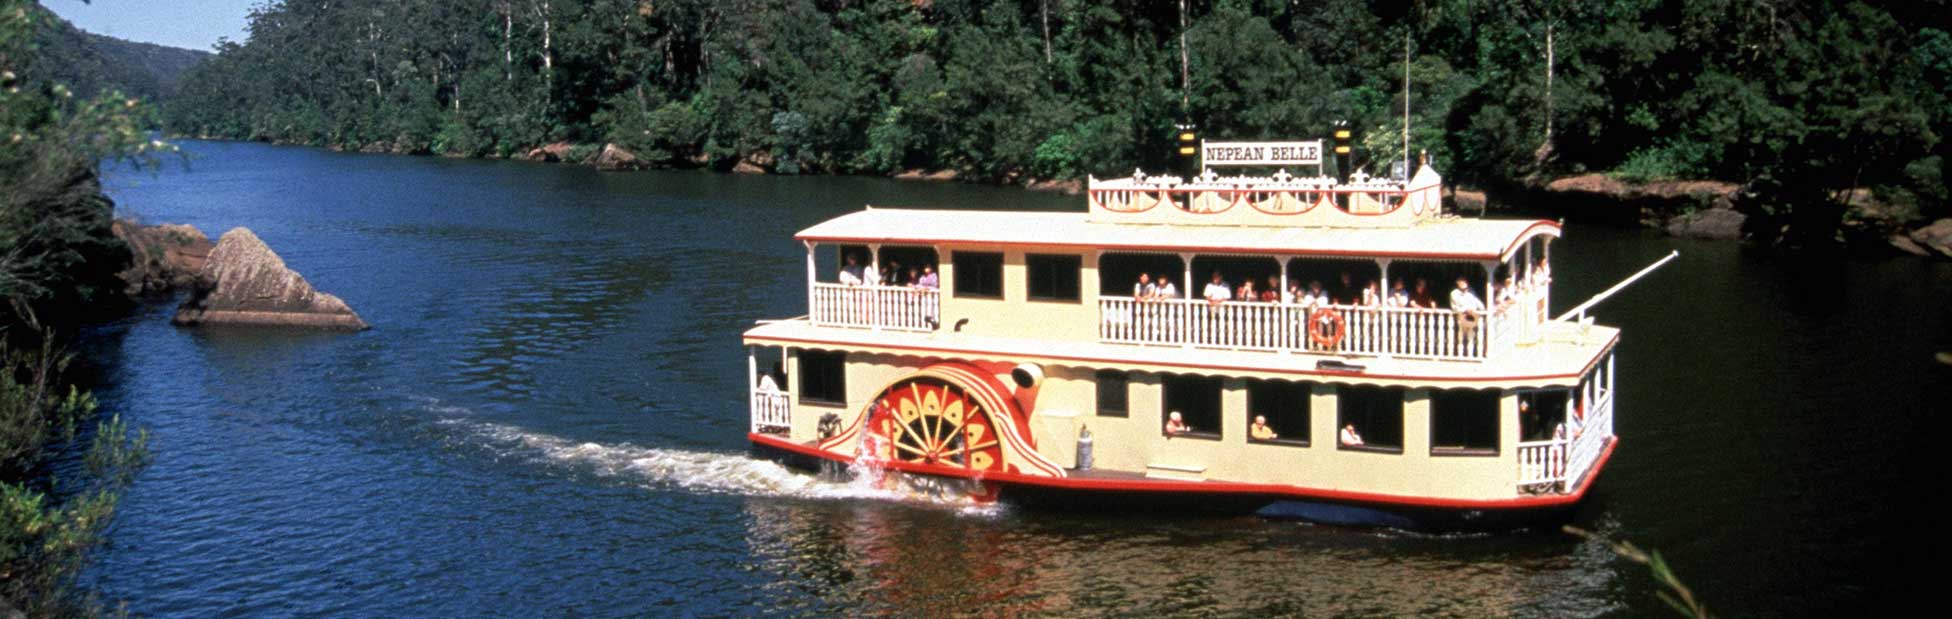 Image of the Nepean Belle